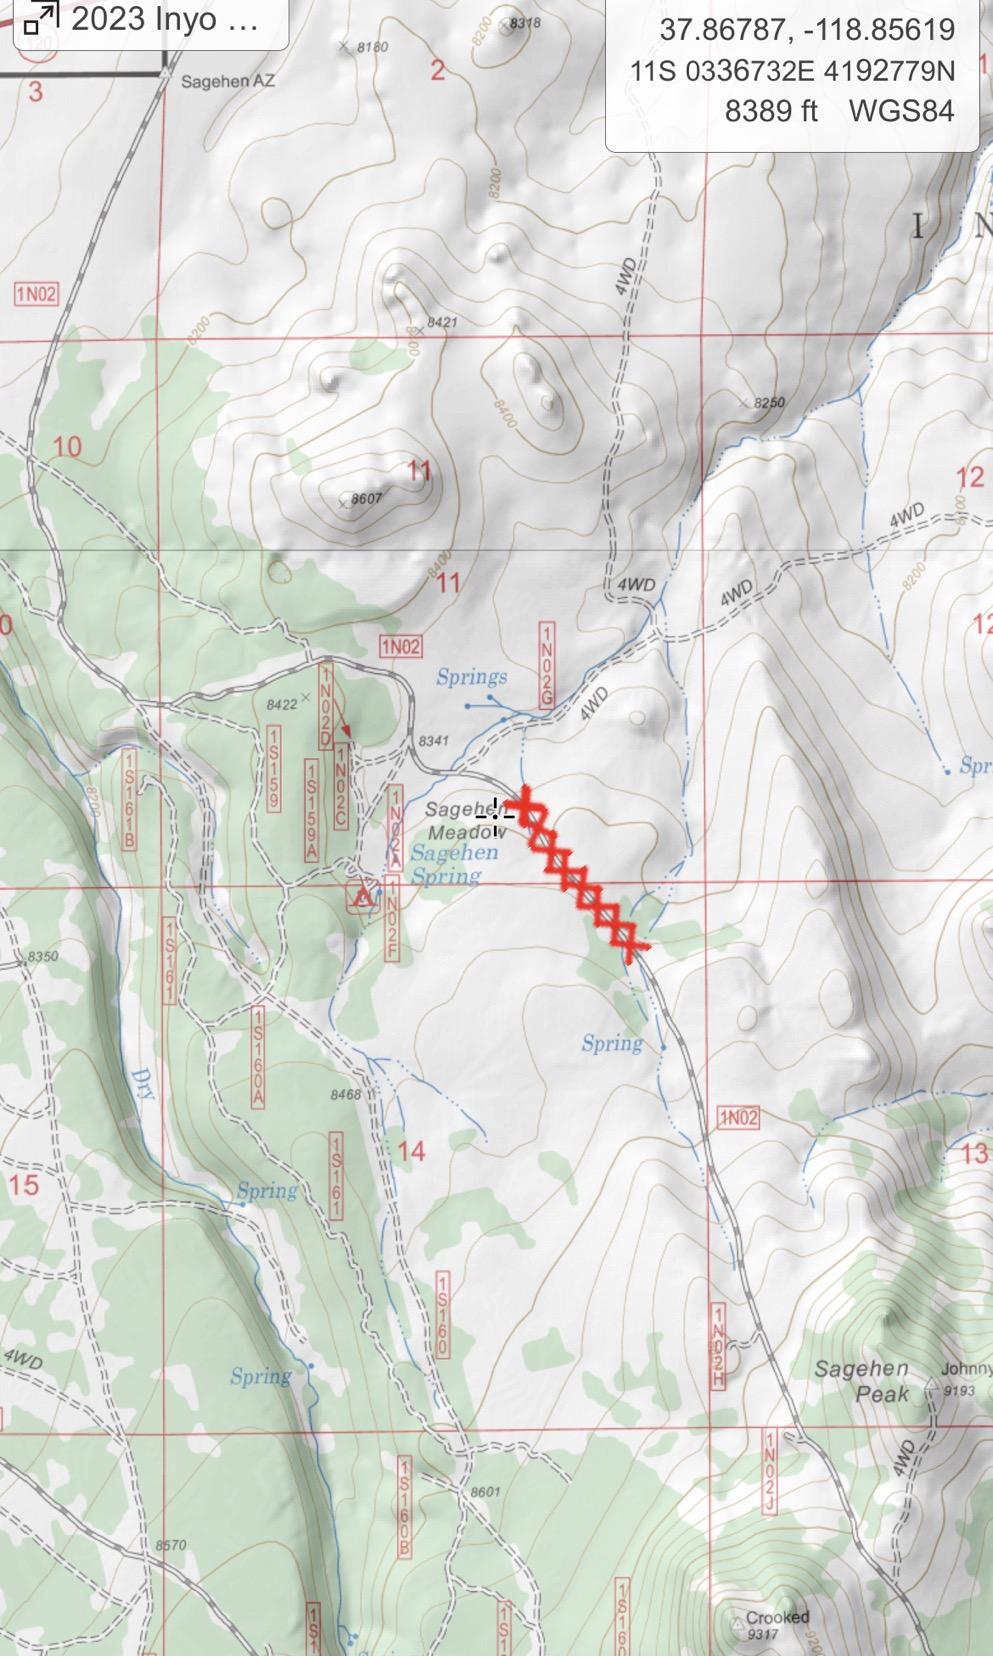 Image of Map showing location of Big Washout on FS Road 1N02 near Sagehen Meadow